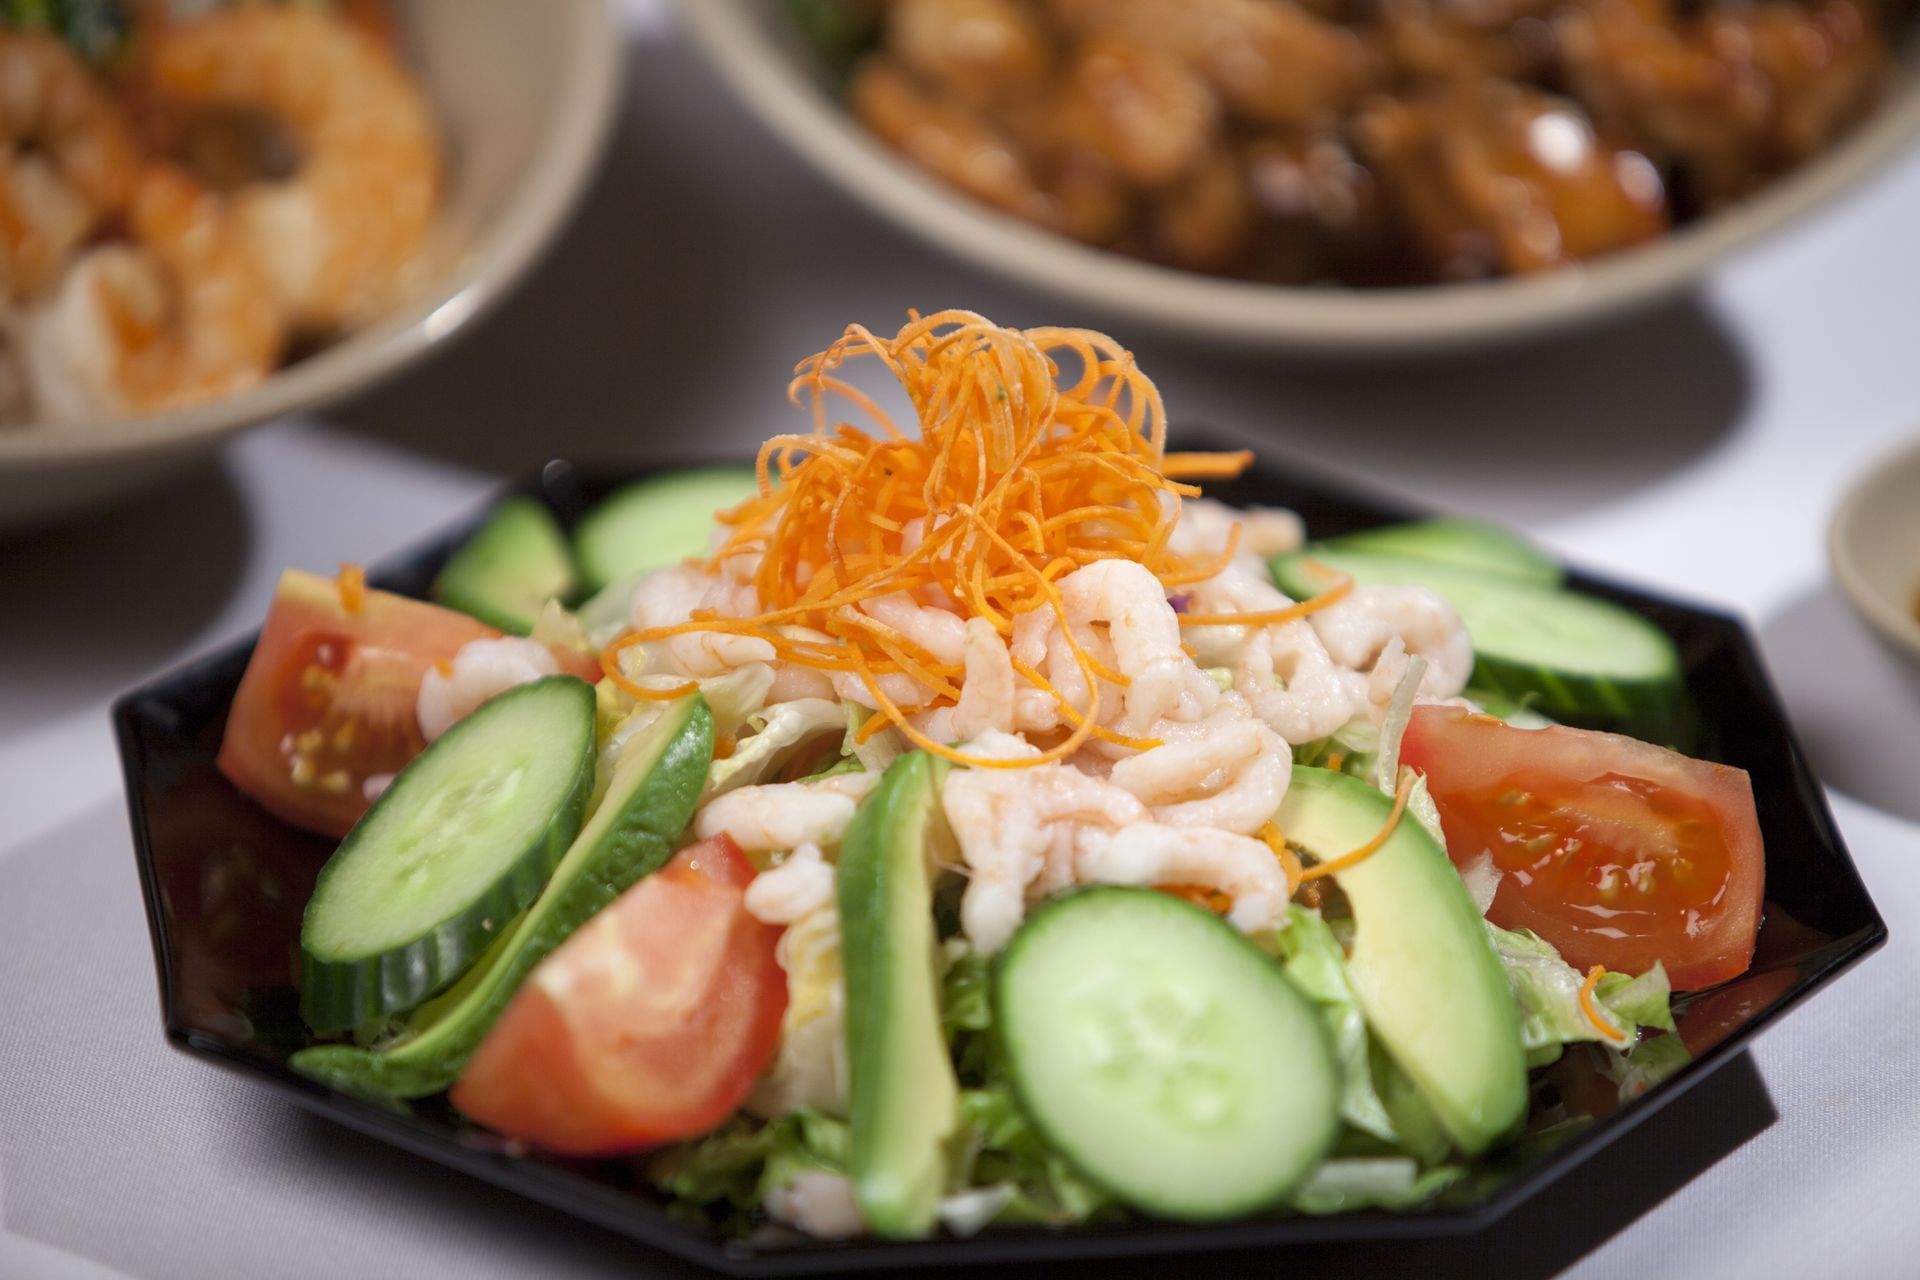 Japense salad with cucumbers, carrots and tomatoes